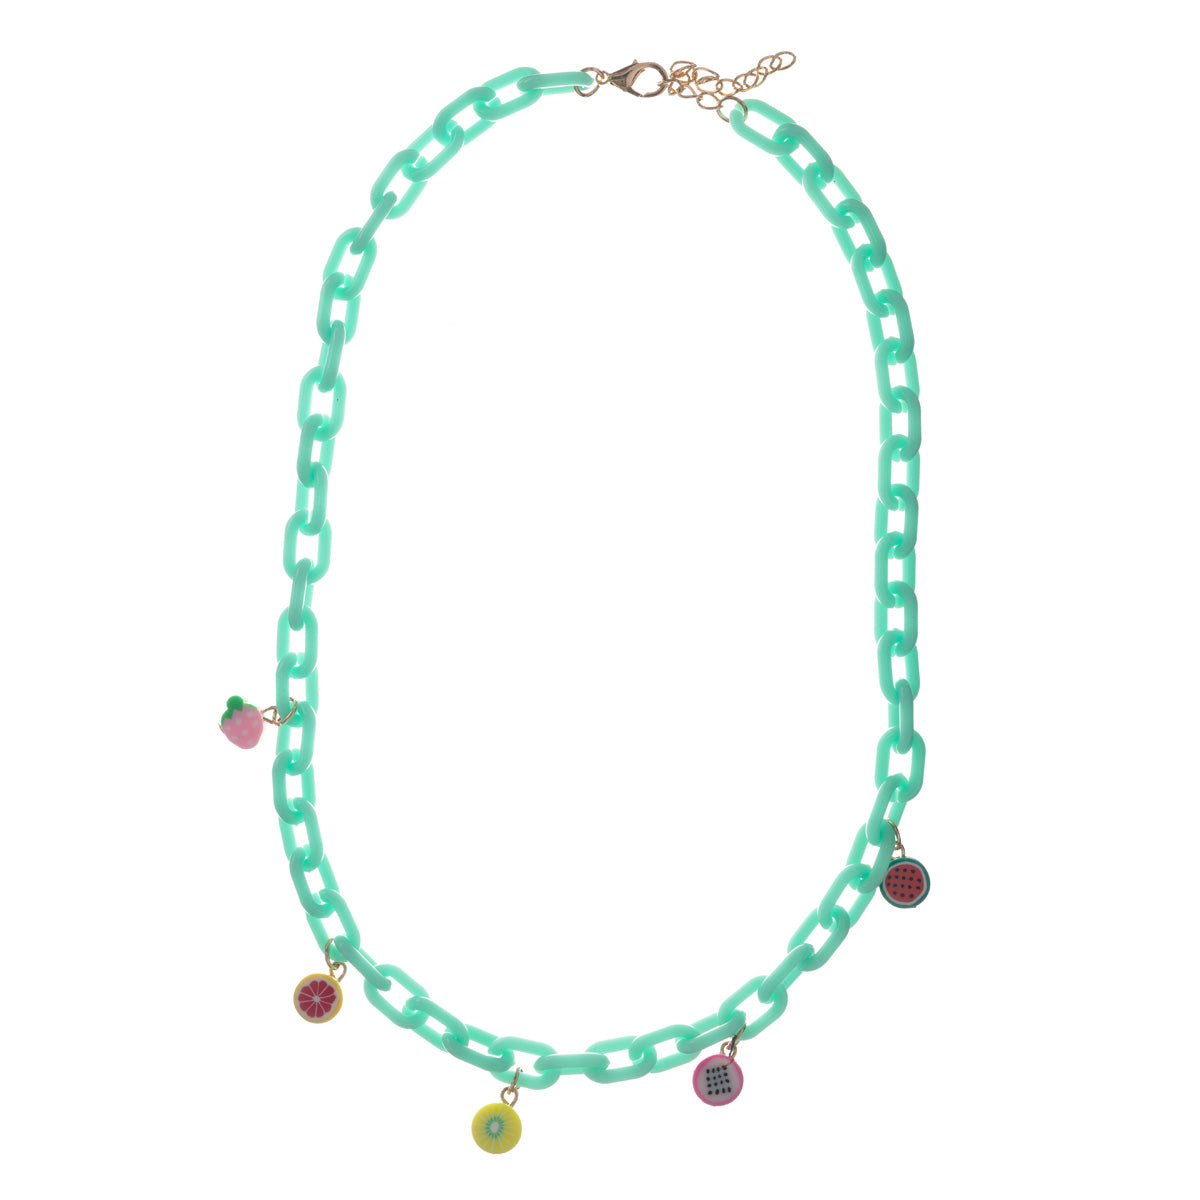 Colorful cable chain necklace 51cm